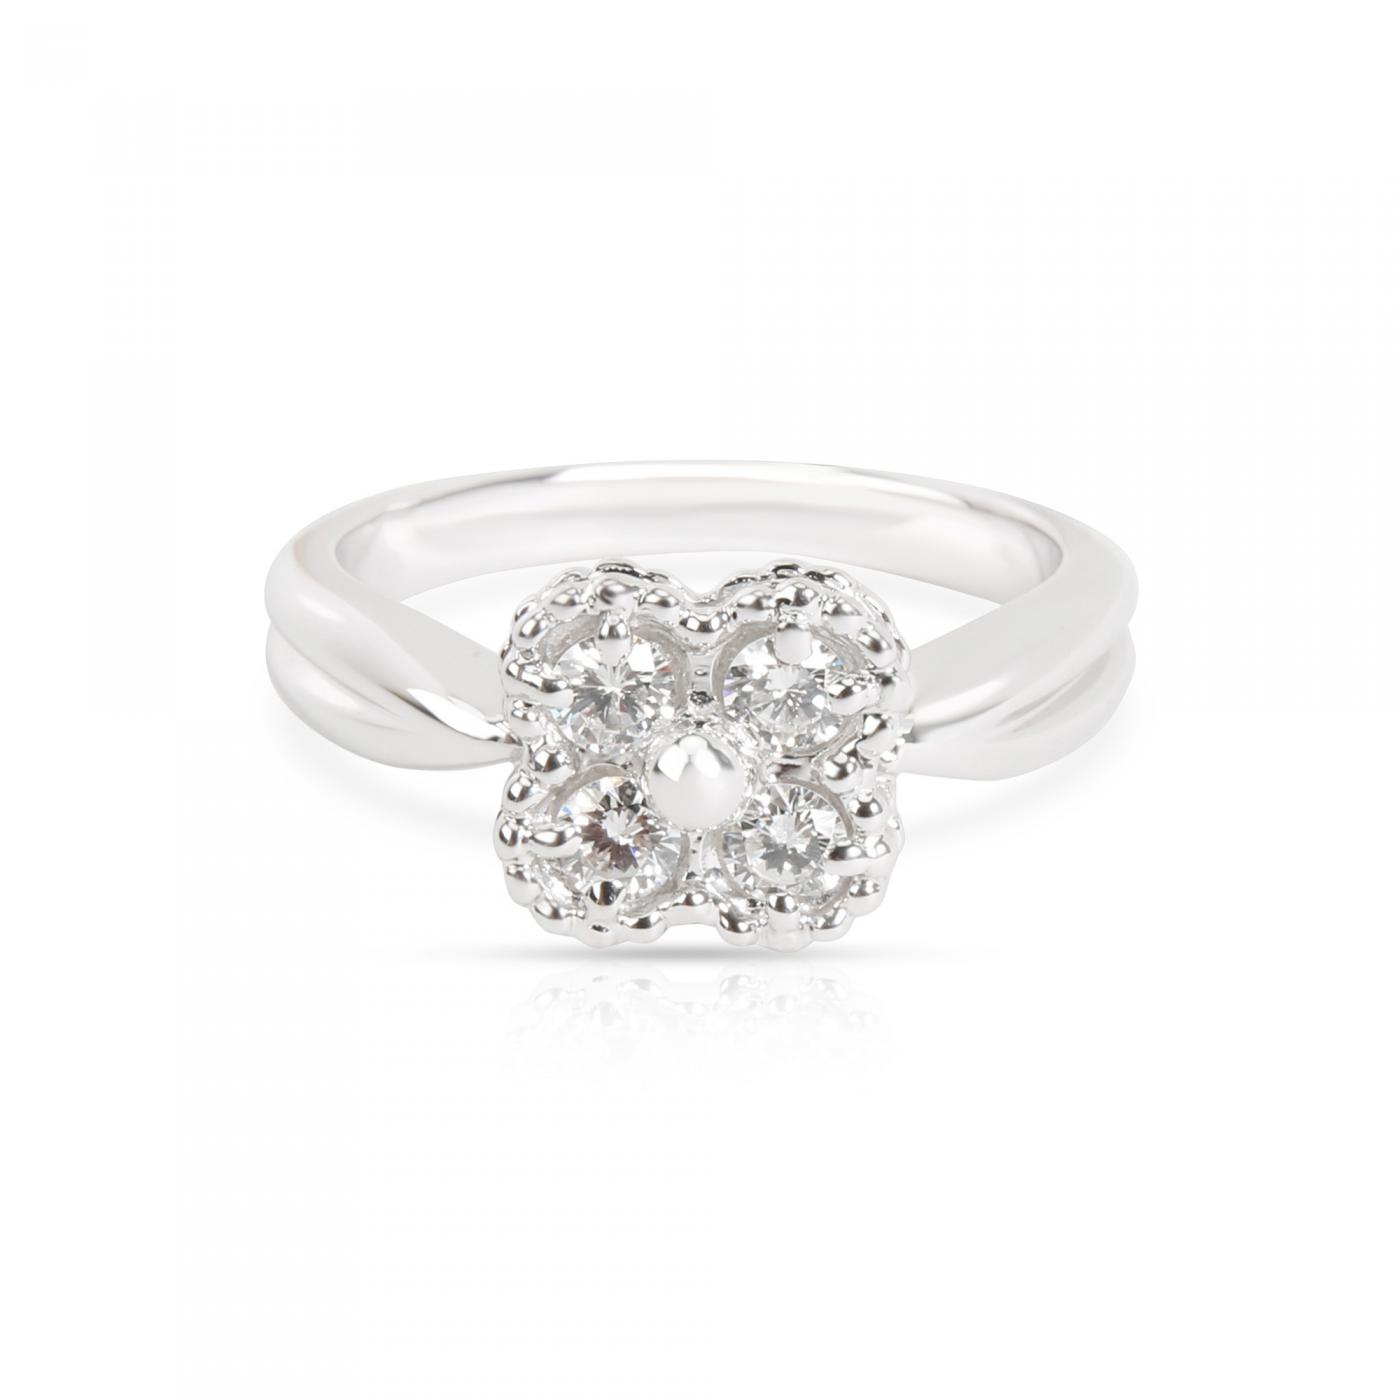 van cleef and arpels engagement ring